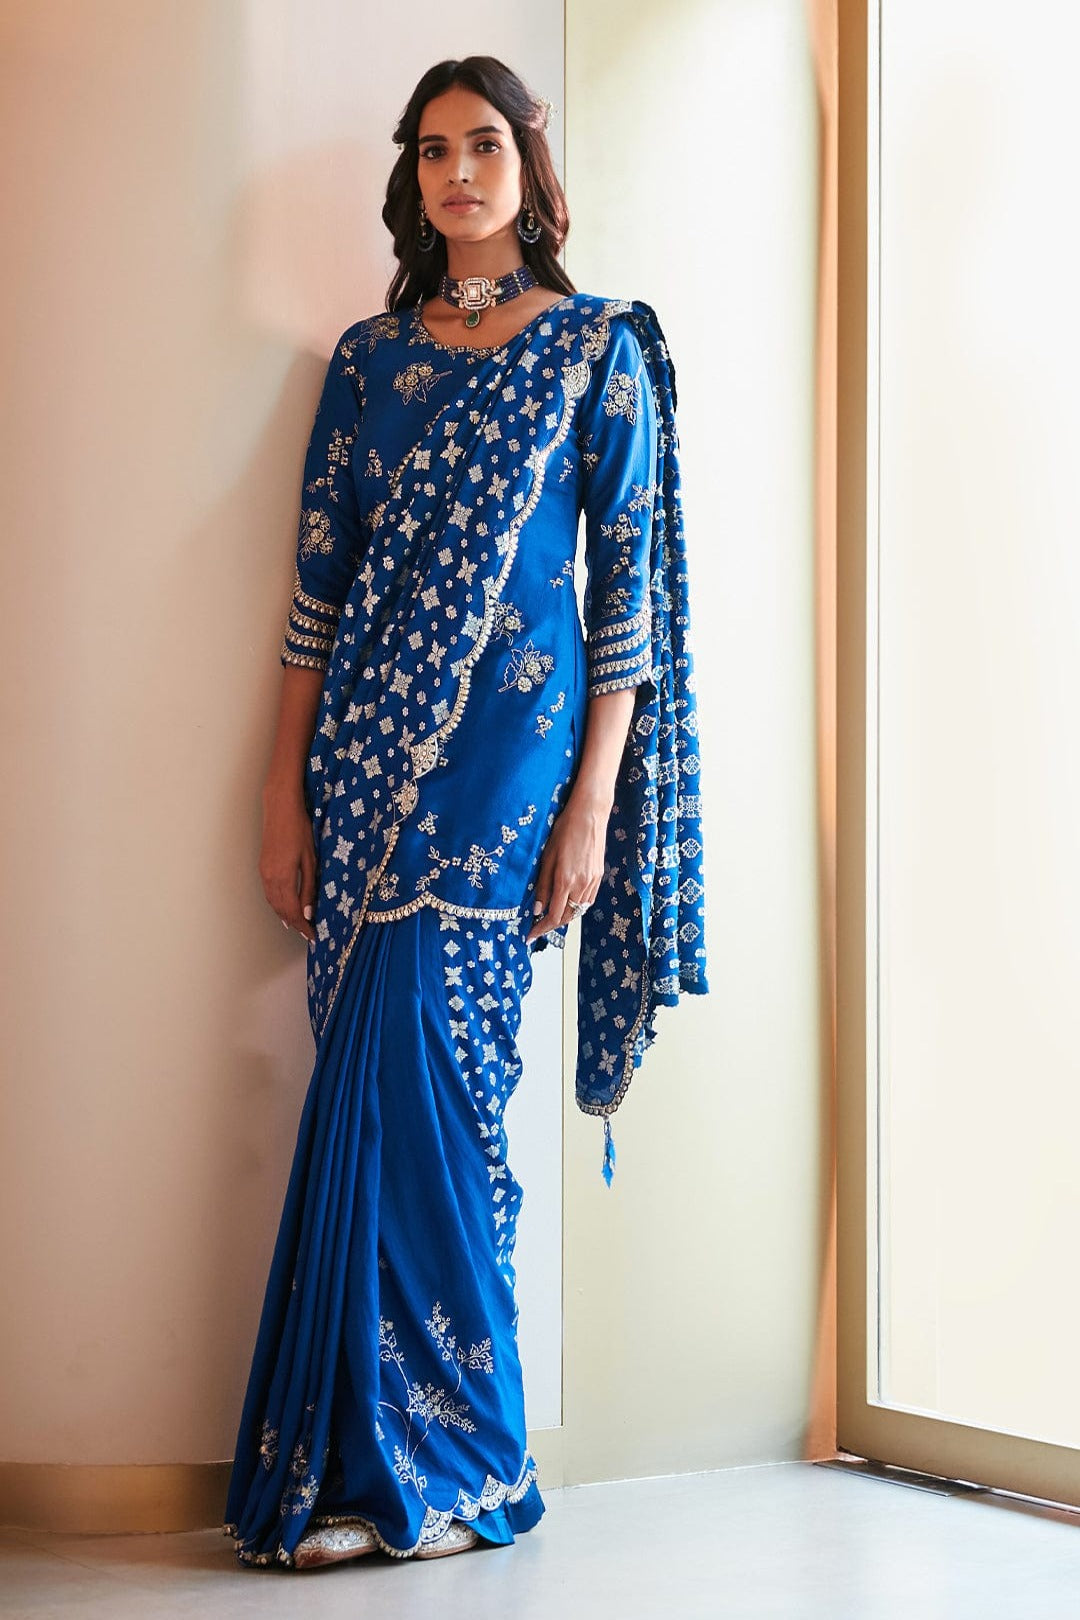 Leher Embroidered Saree and Long Blouse